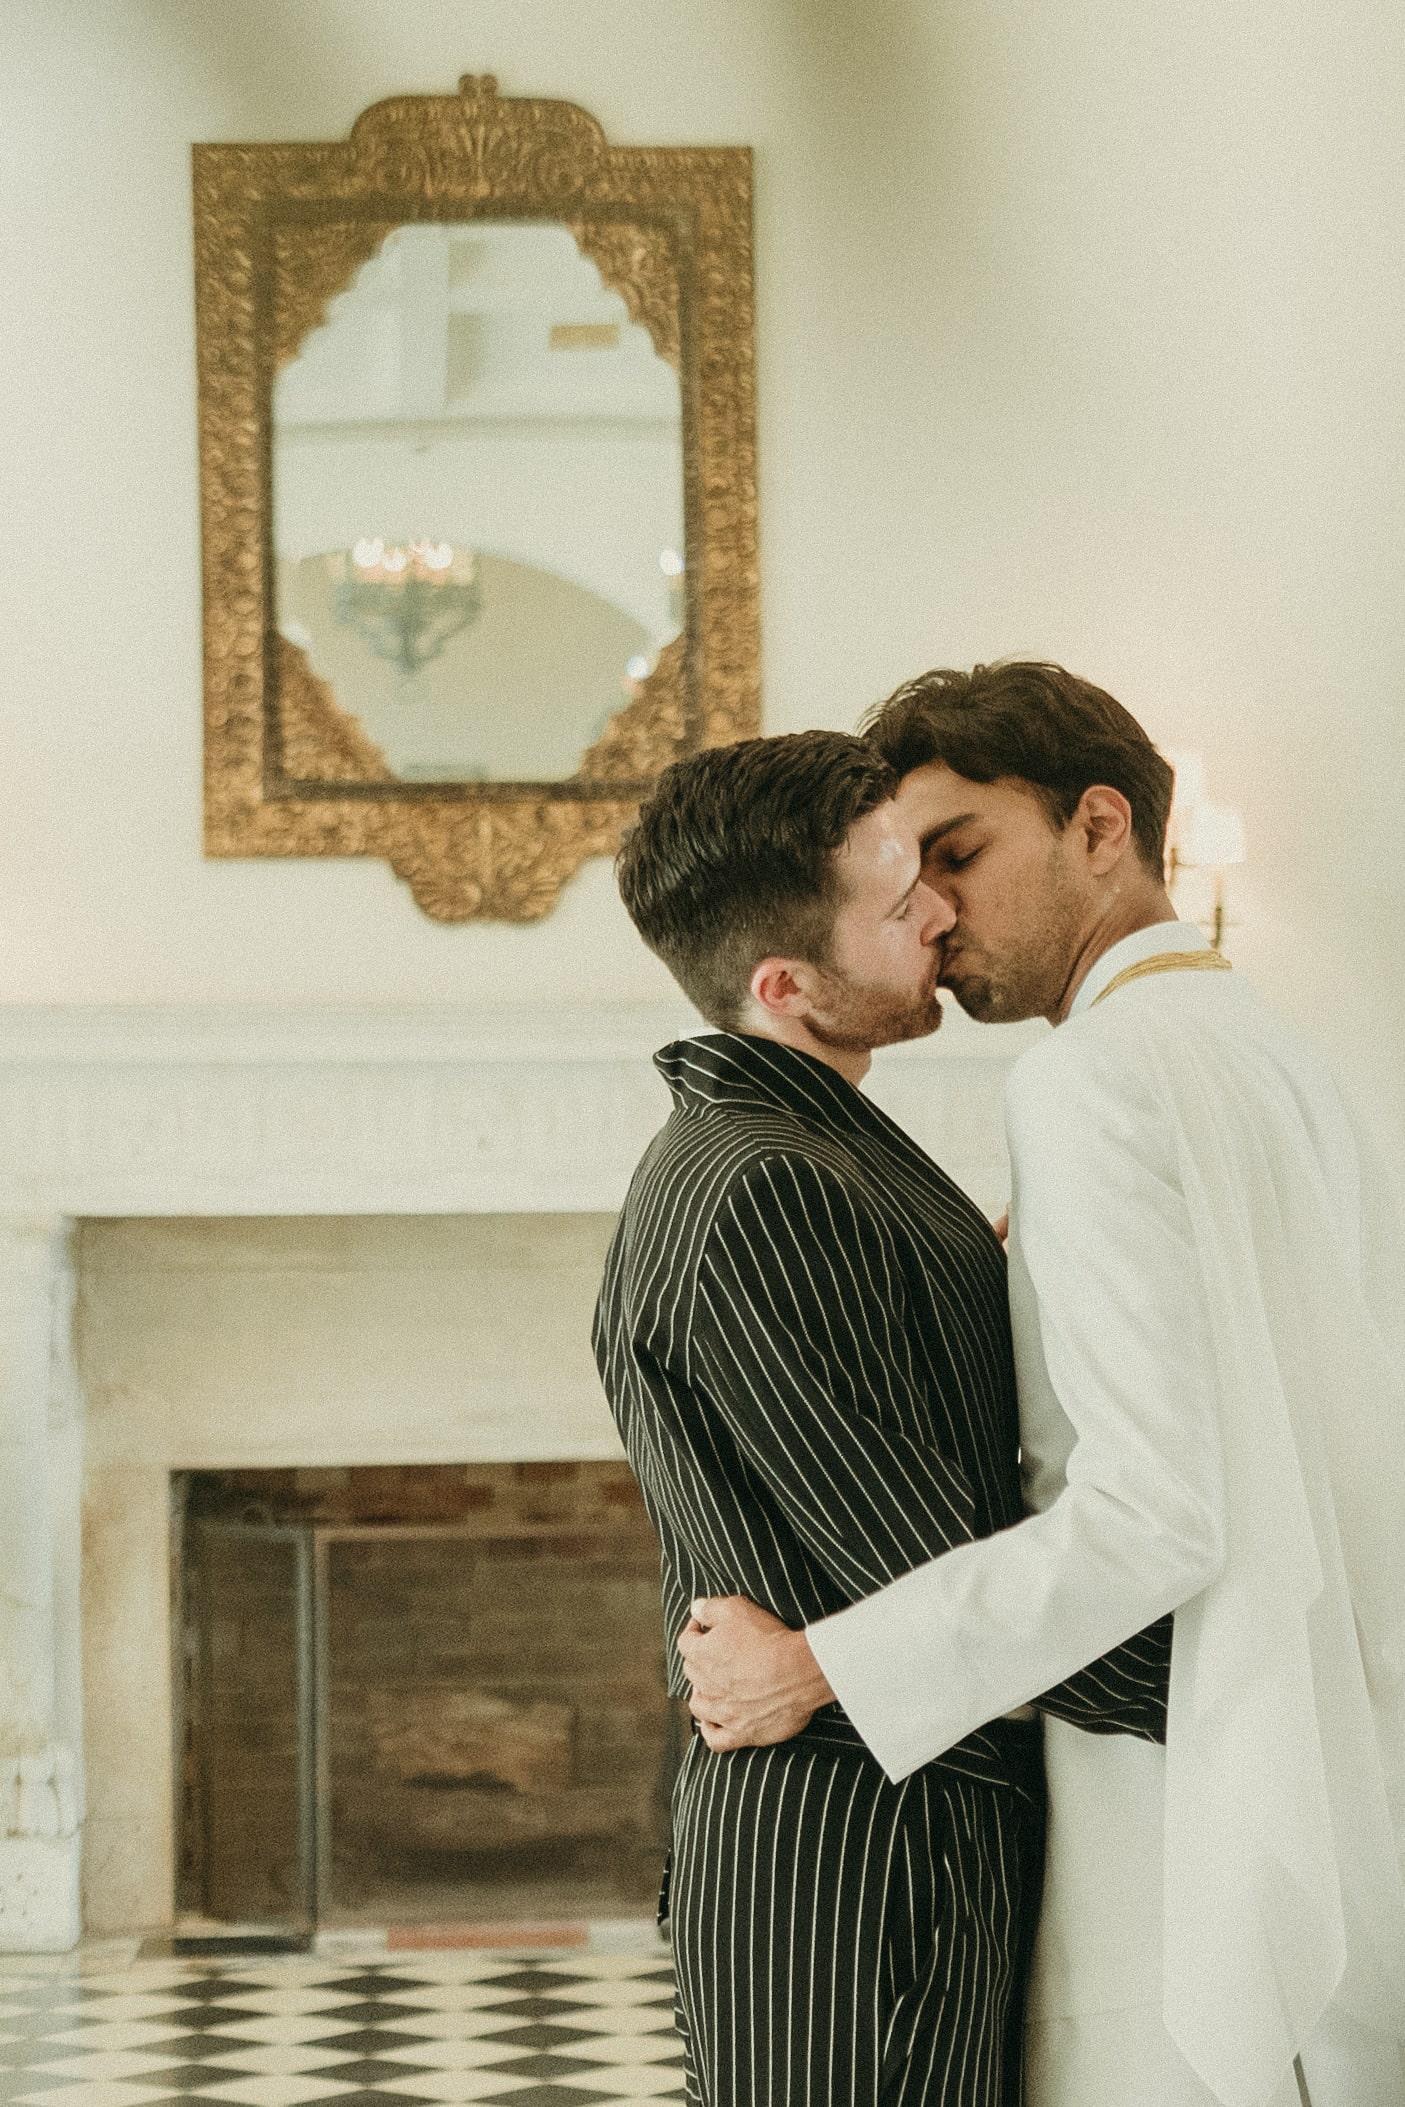 Grooms embracing inside Deering Estate's historic Stone House Museum's grand hall ballroom. The Grand Hall Ballroom's fireplace is in the background.